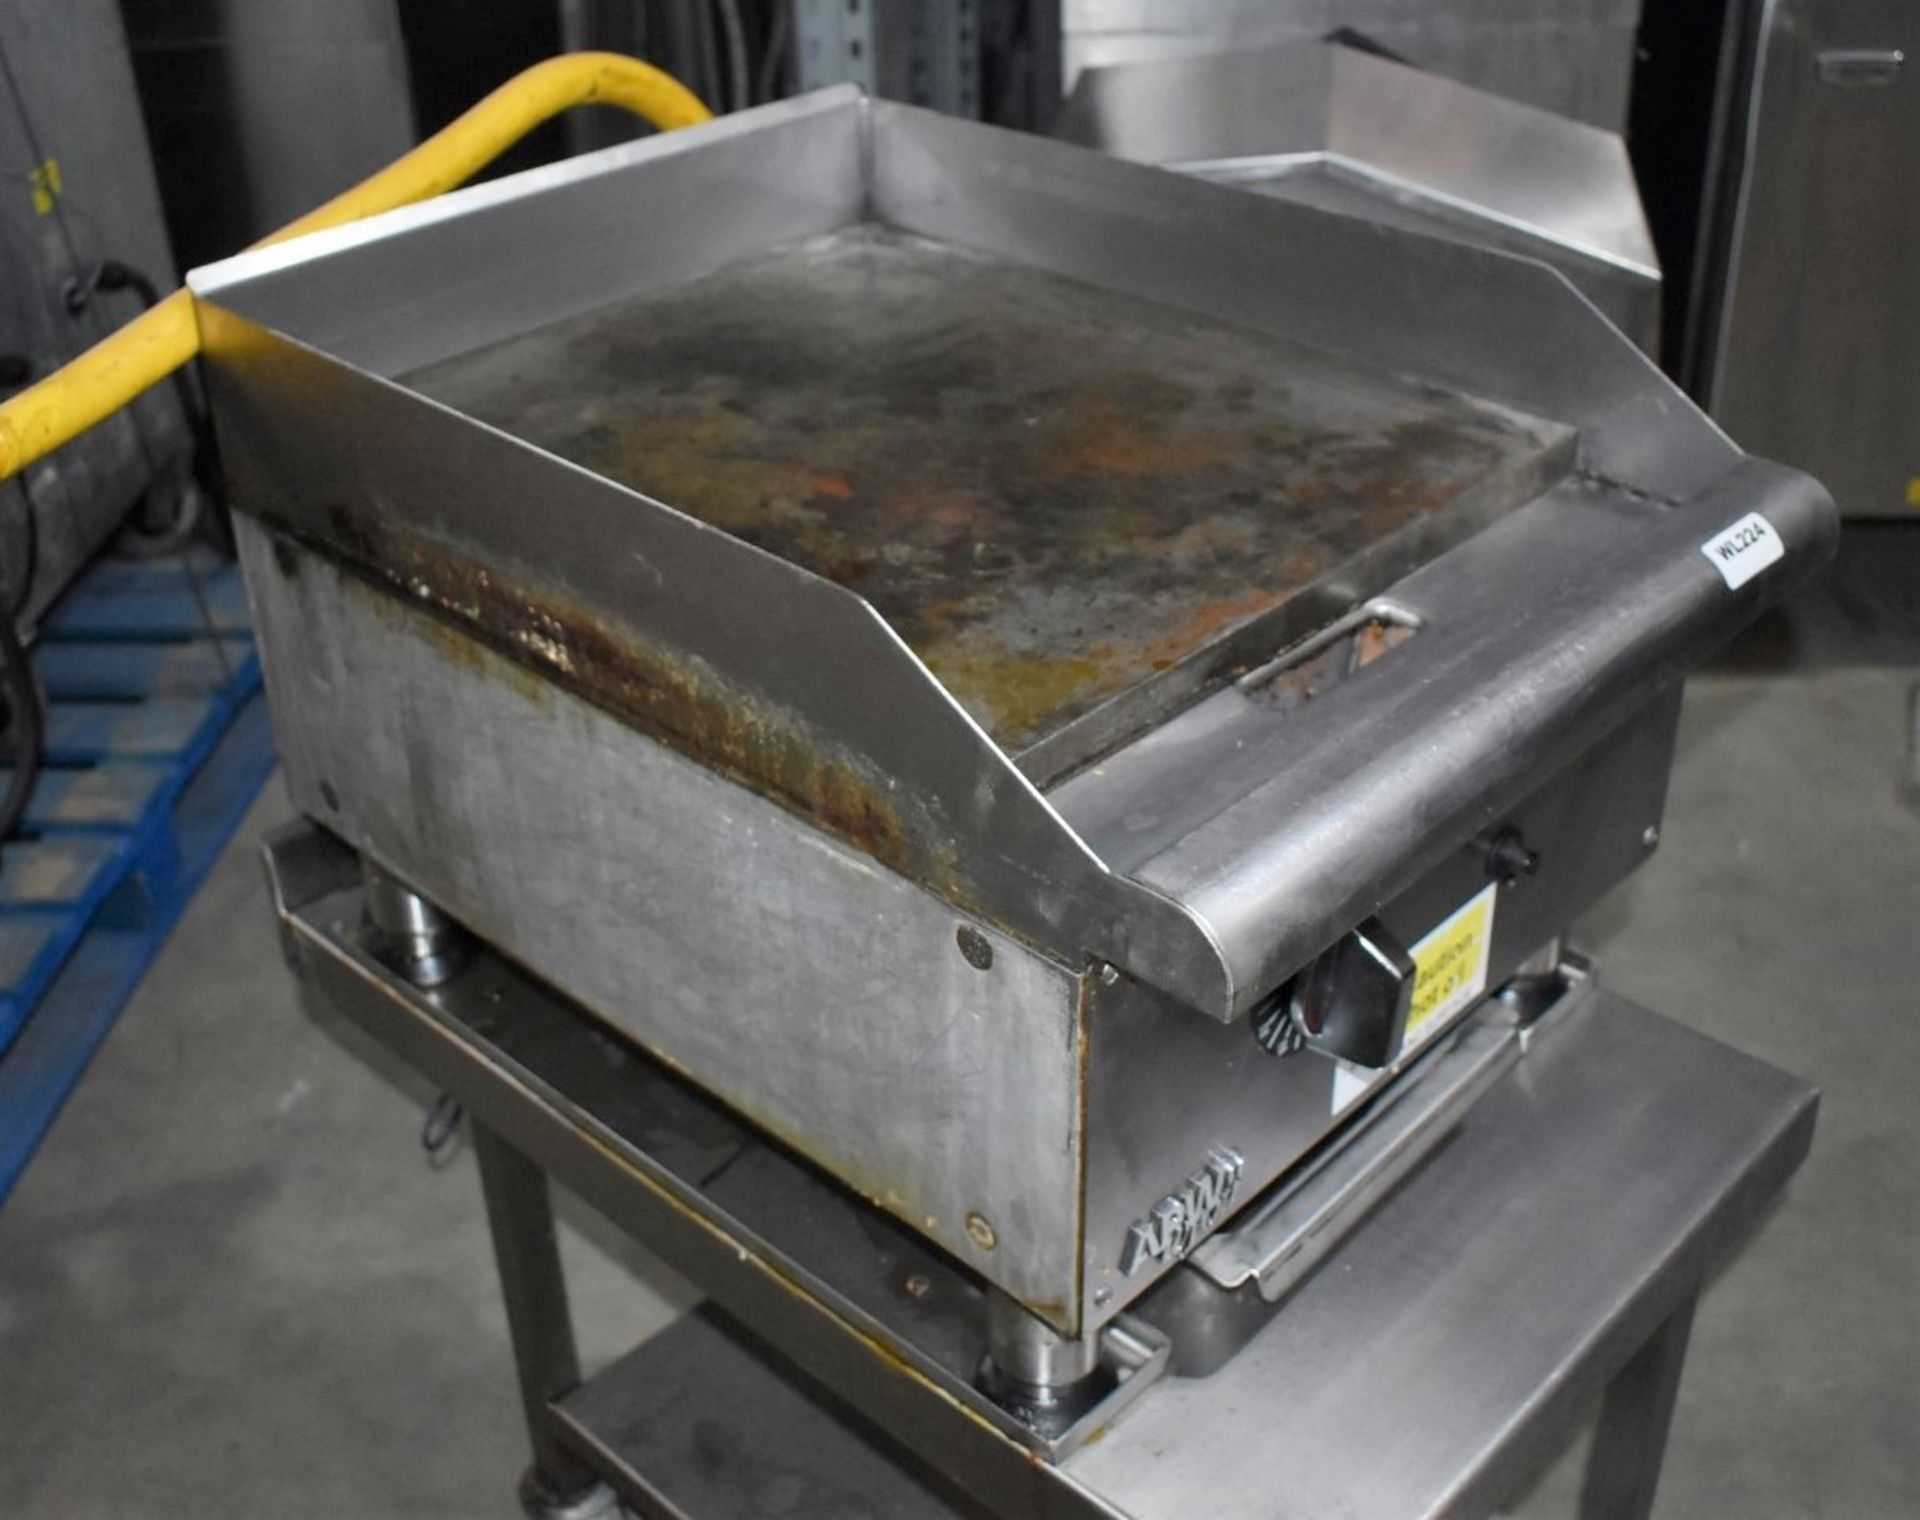 1 x APW Wyott Commercial Solid Top Cooking Griddle With Stand - Gas Powered - Size H99 x W46 x D60 - Image 8 of 10